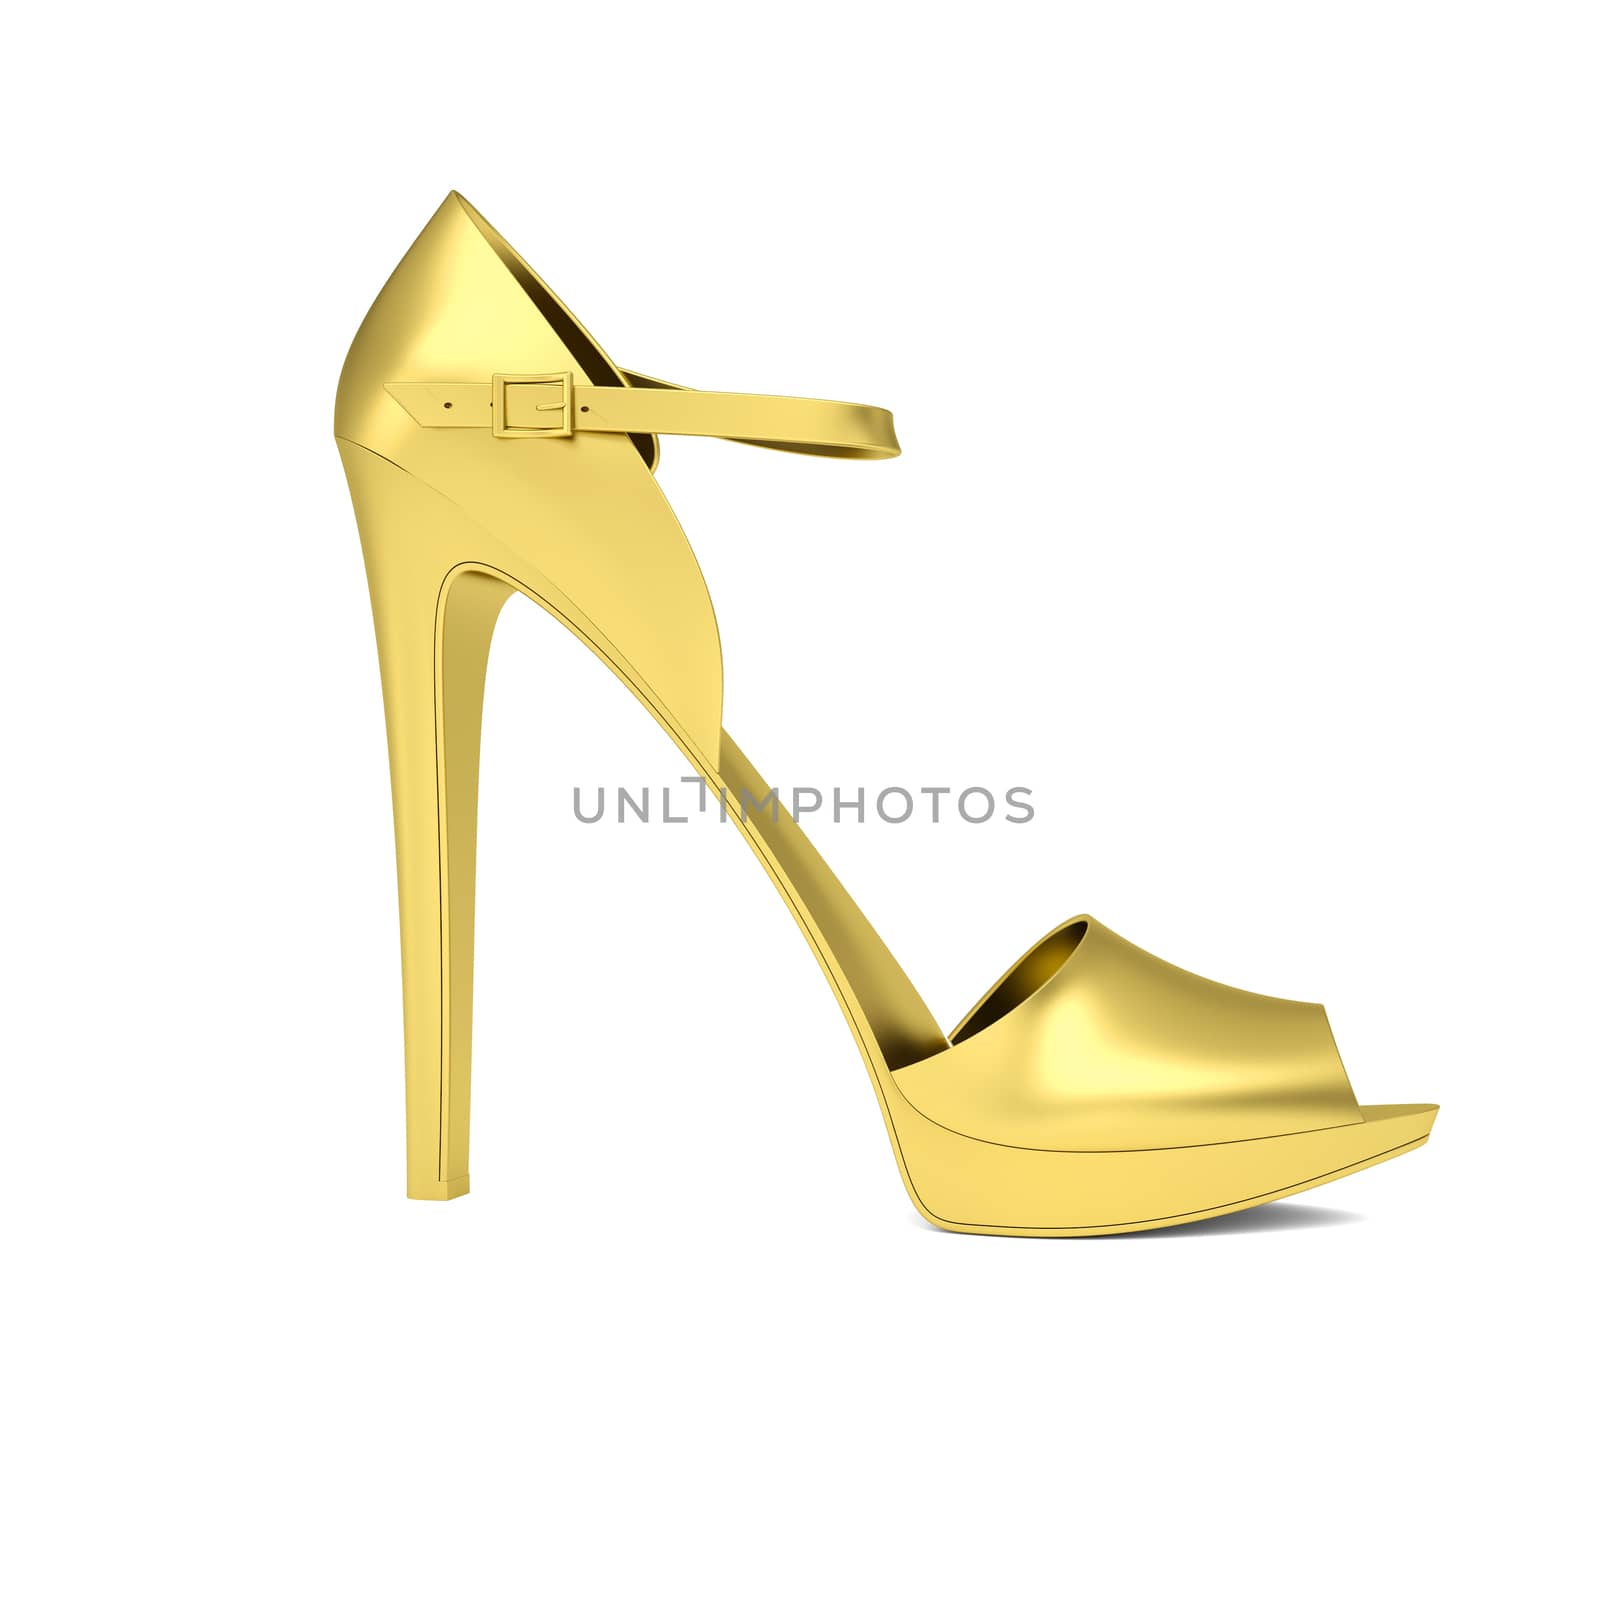 Gold women's shoe. Isolated render on a white background